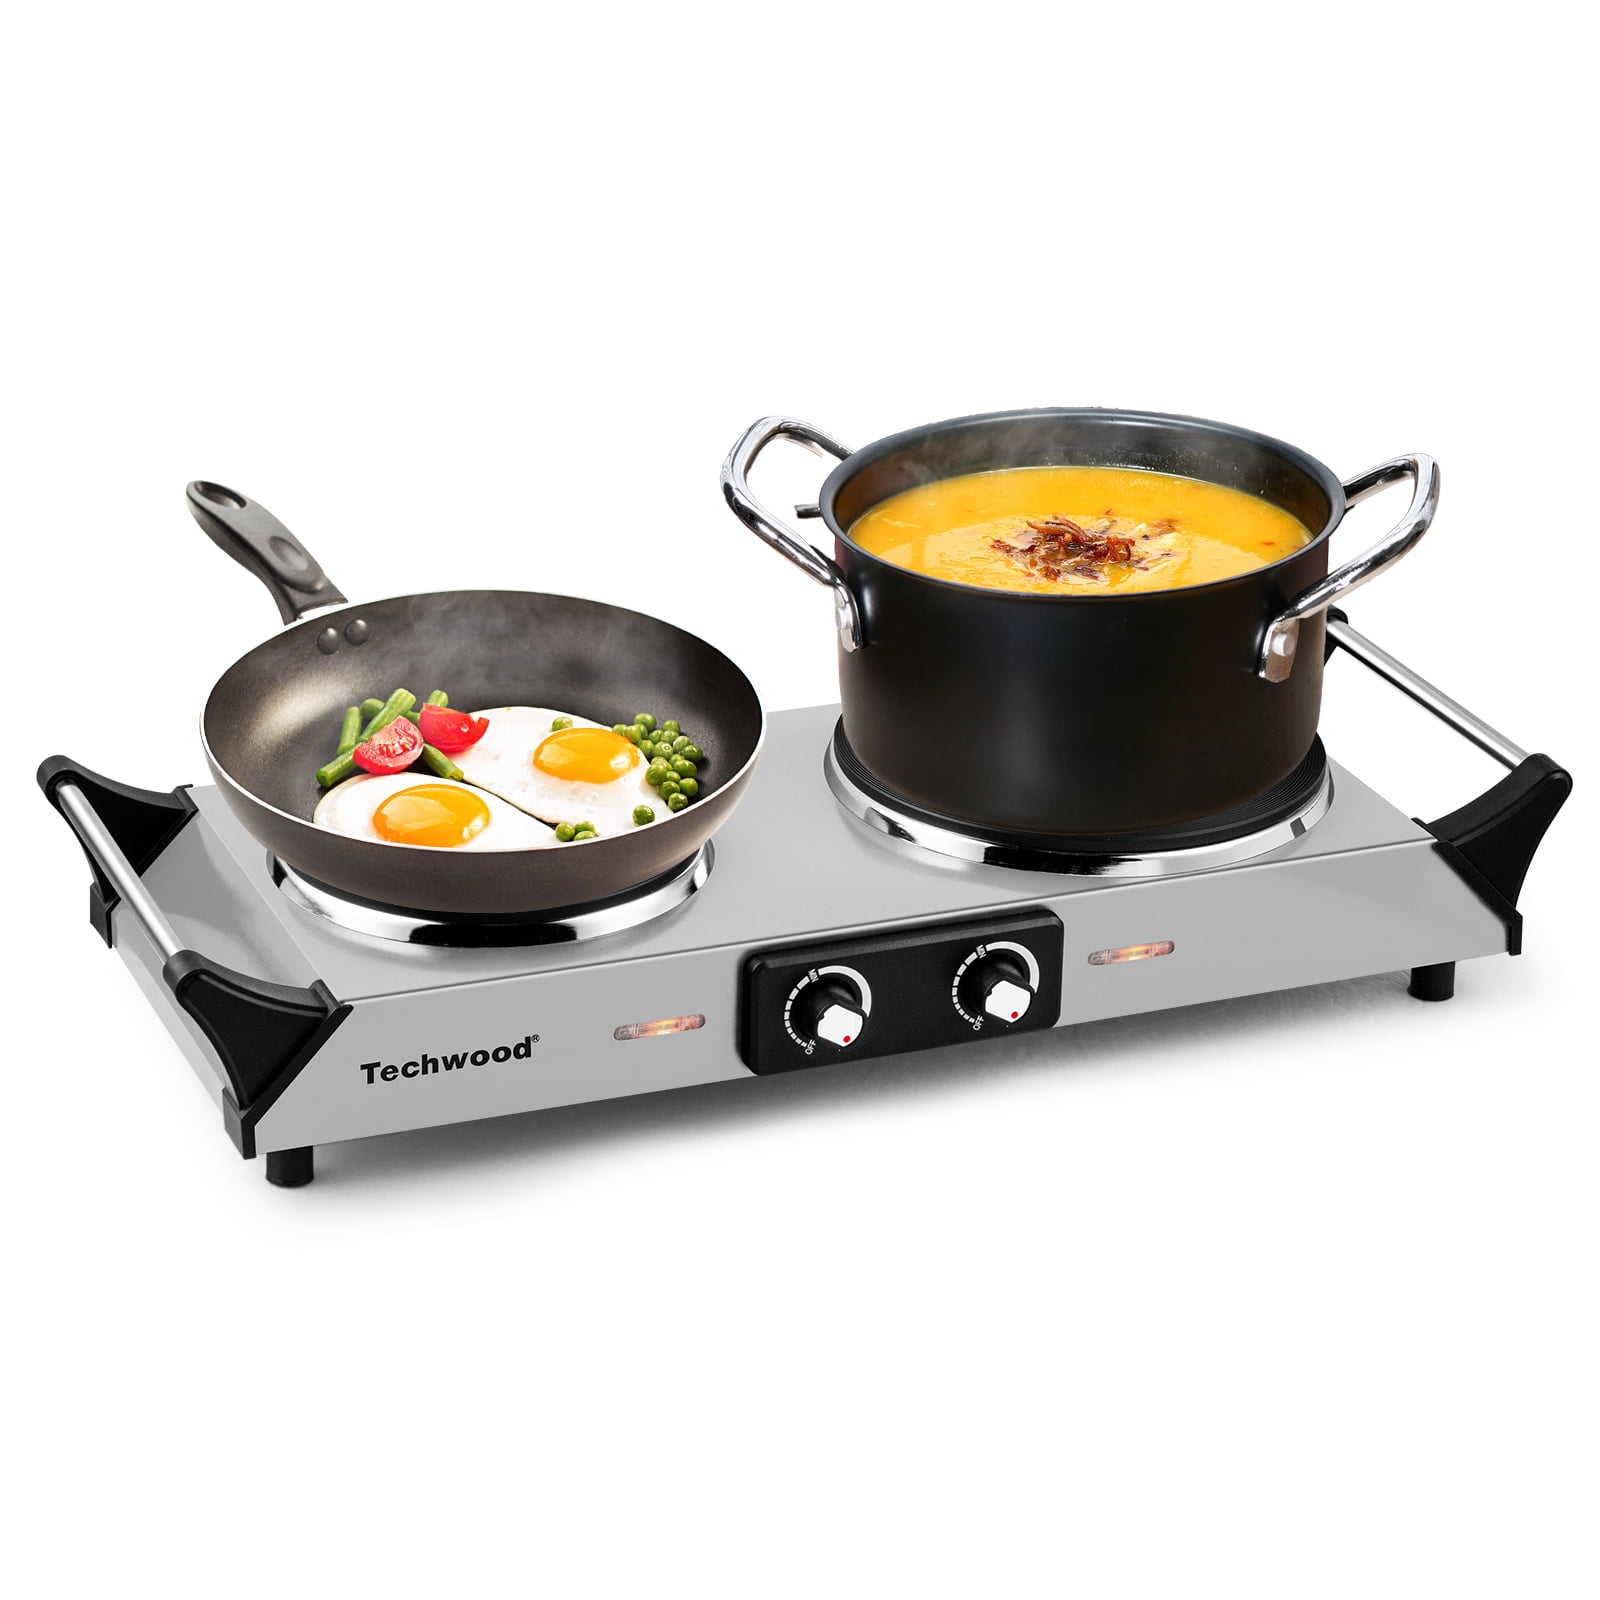 Techwood Hot Plate Portable Electric Stove 1500W Countertop Single Burner  with Adjustable Temperature & Stay Cool Handles, 7.5” Cooktop for Dorm